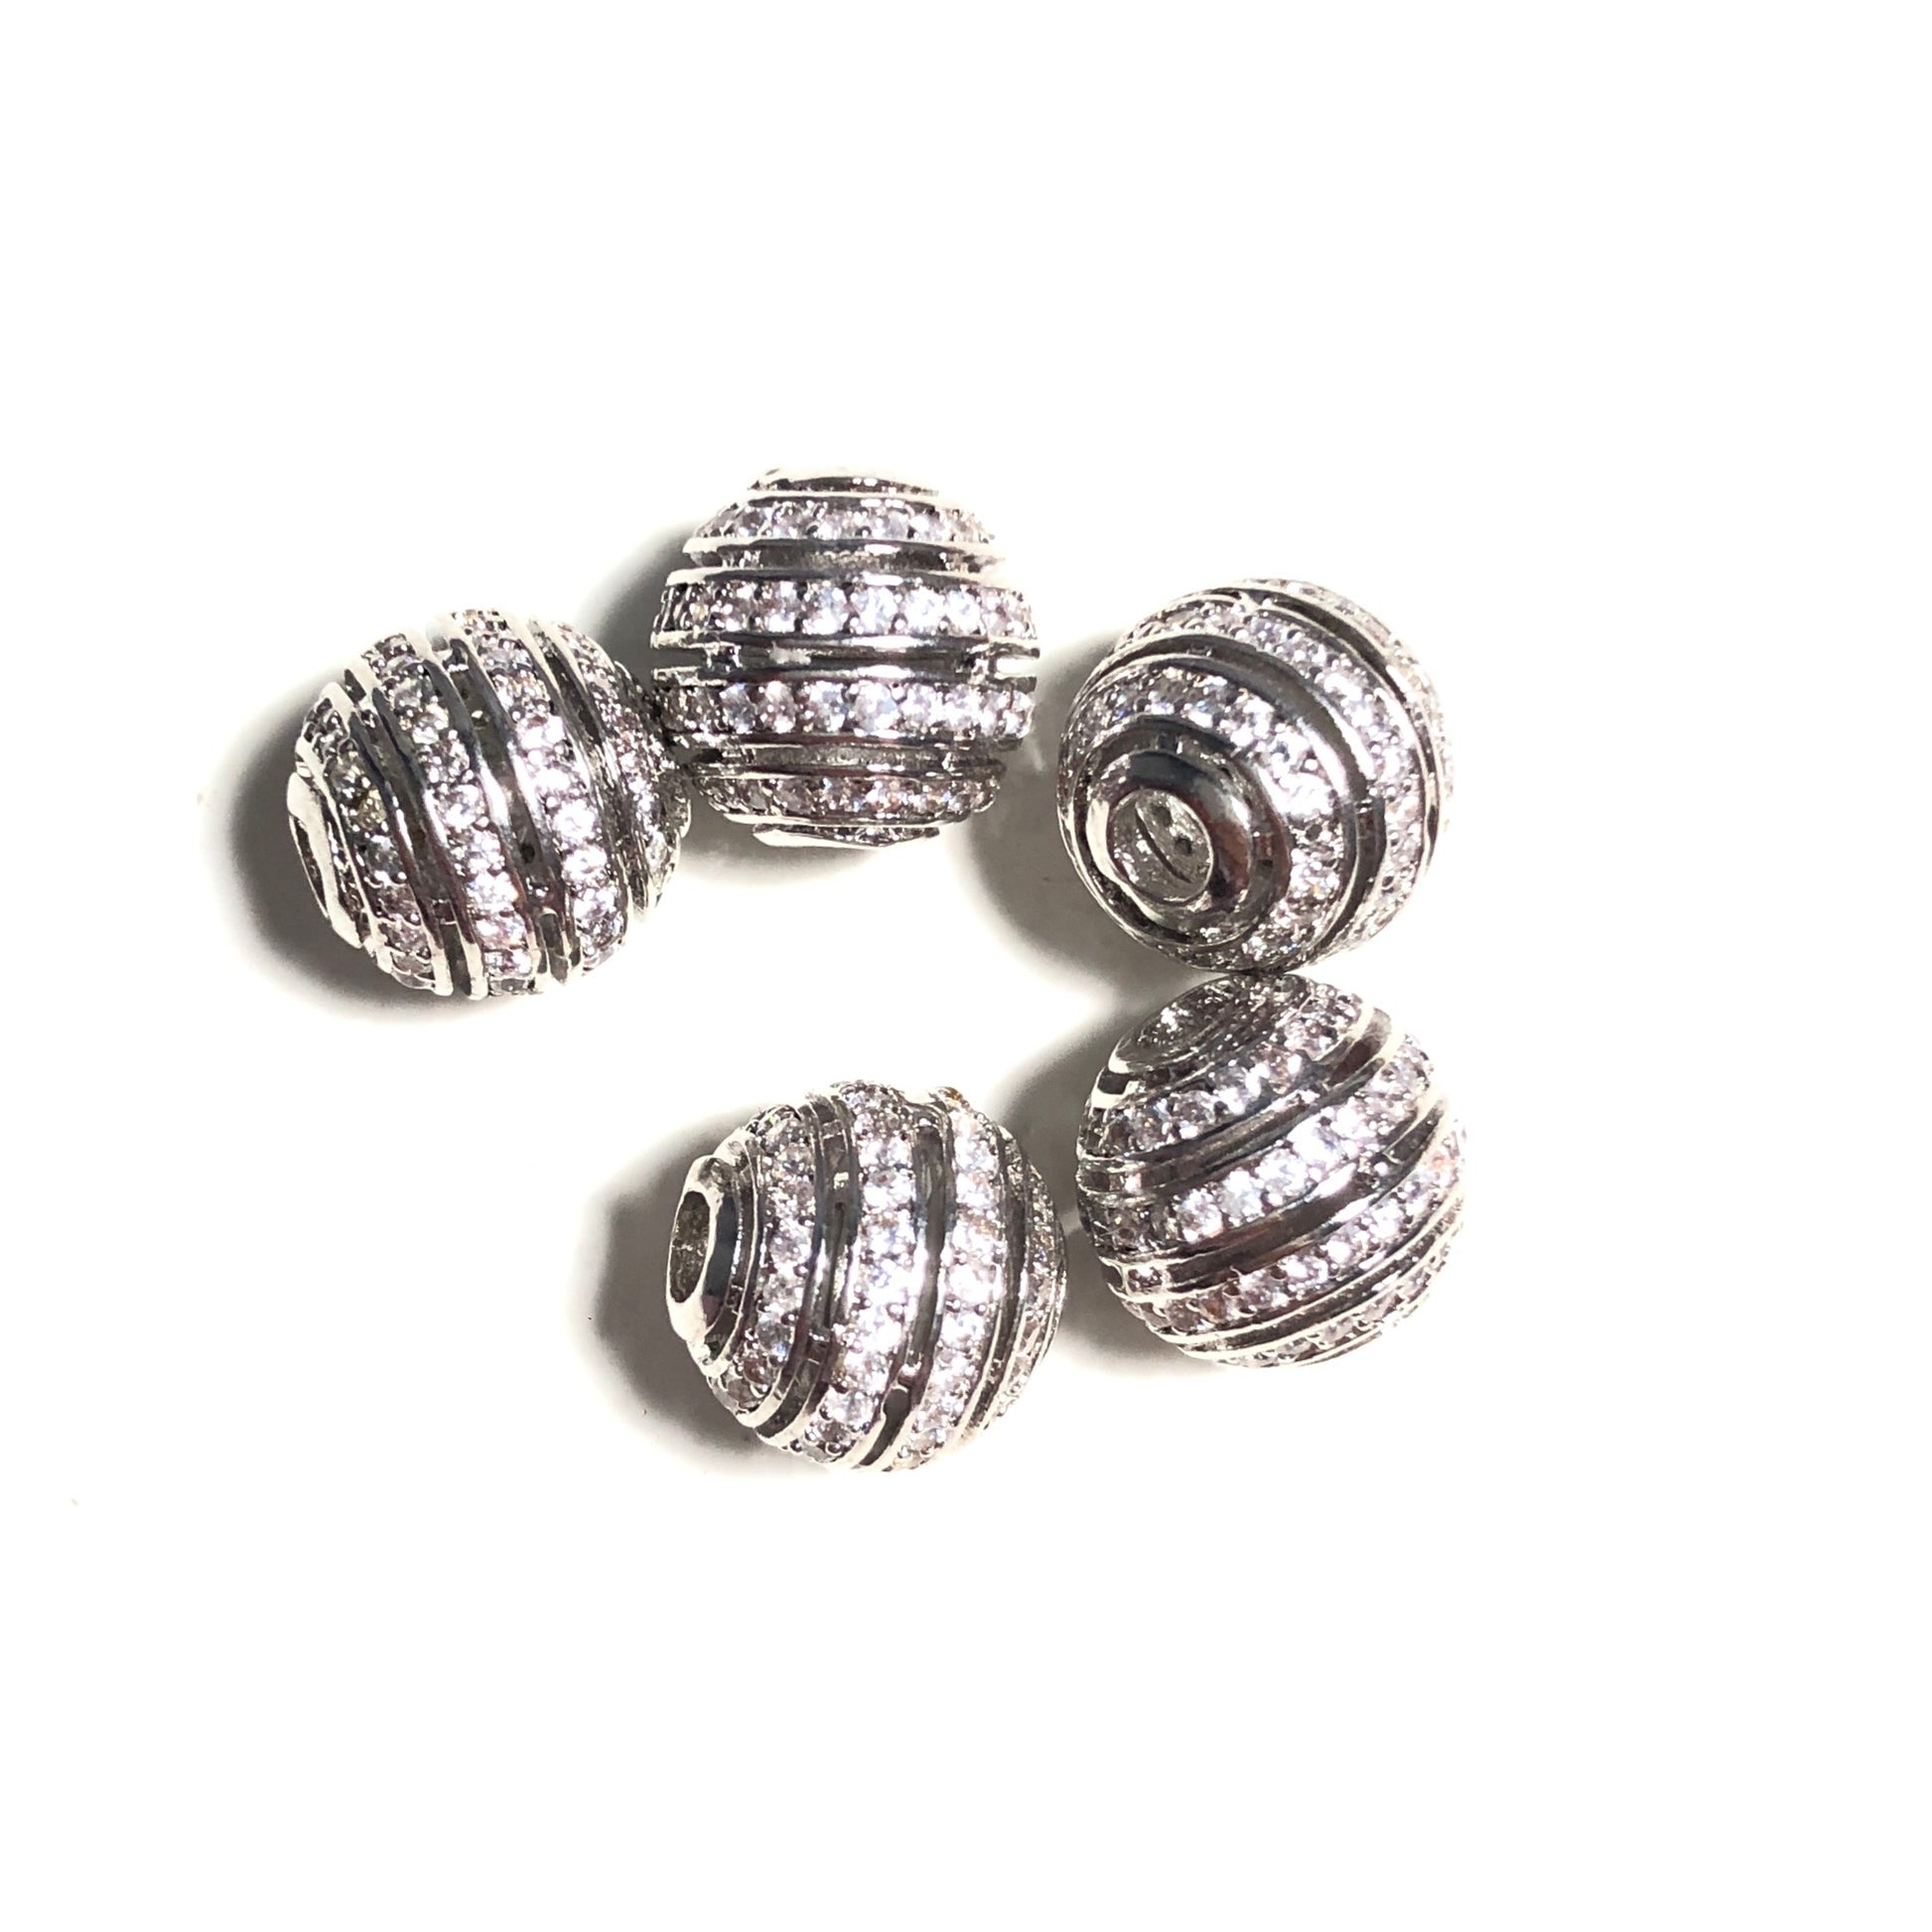 20pcs/lot 10mm CZ Paved Hollow Round Ball Spacers Silver CZ Paved Spacers 10mm Beads Ball Beads Charms Beads Beyond